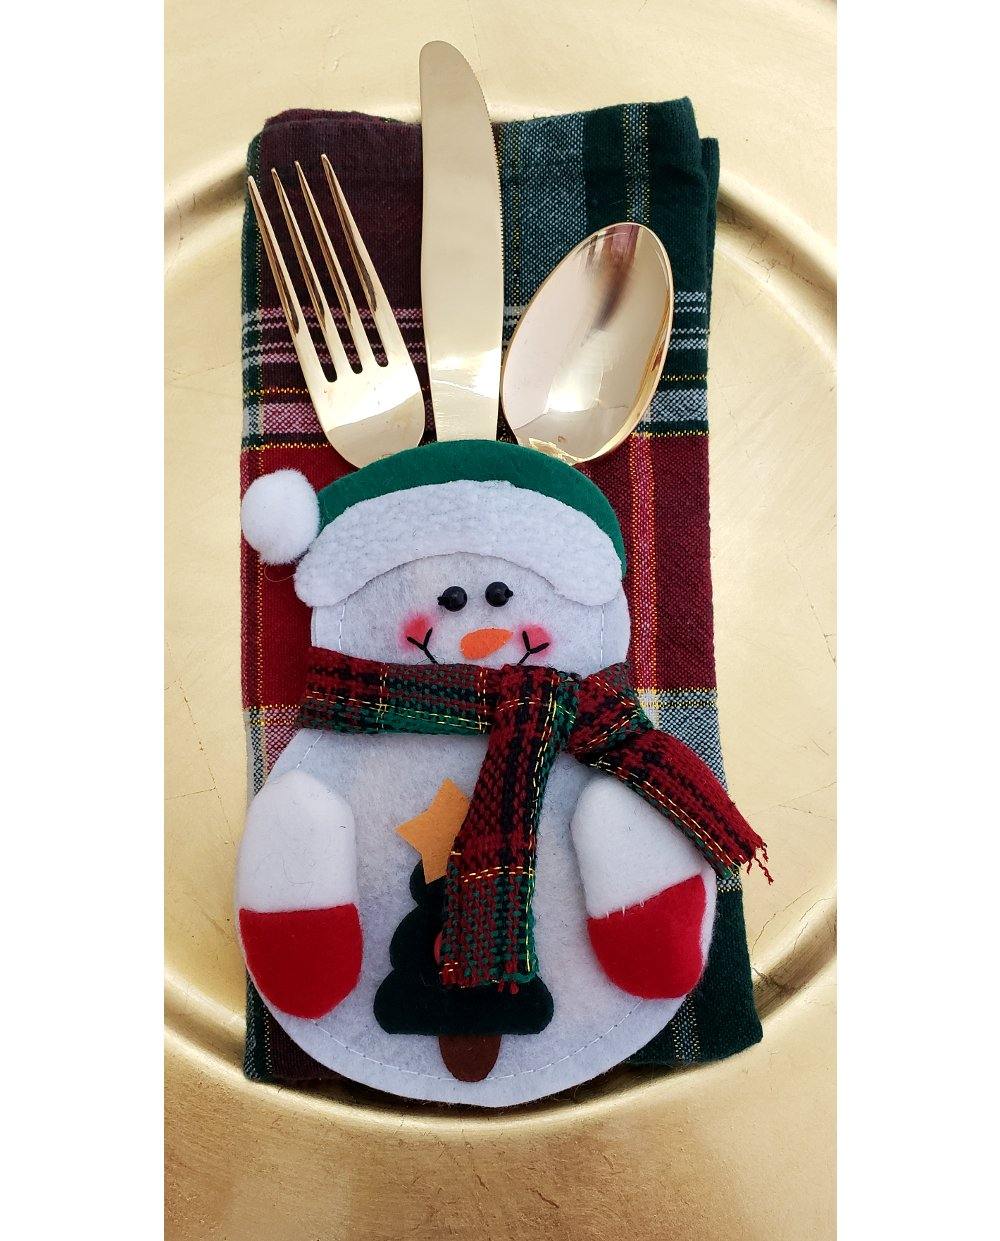 Snowman Flatware Holder - perfect for kids! - Tipsy Totes | Wine Gifts | Beer Koozies | Wine Totes | Simply Fabulous